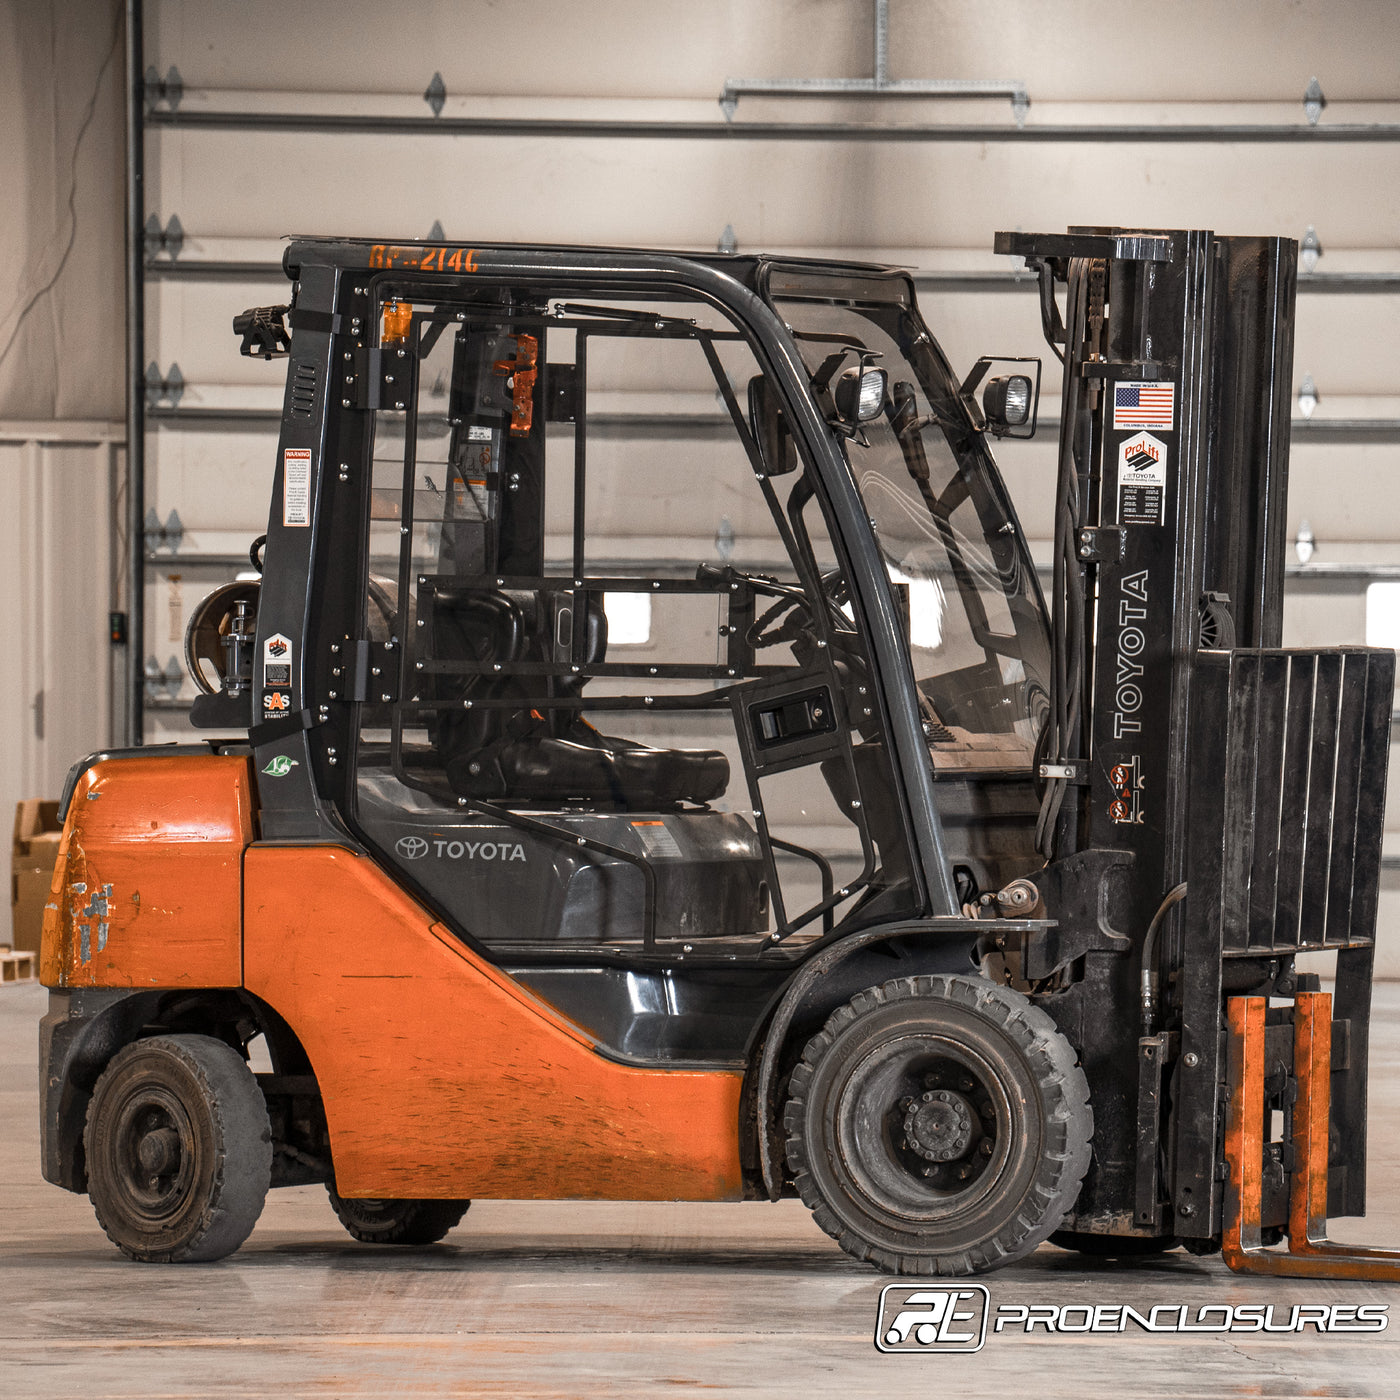 Toyota Forklift cab enclosure with front windshield